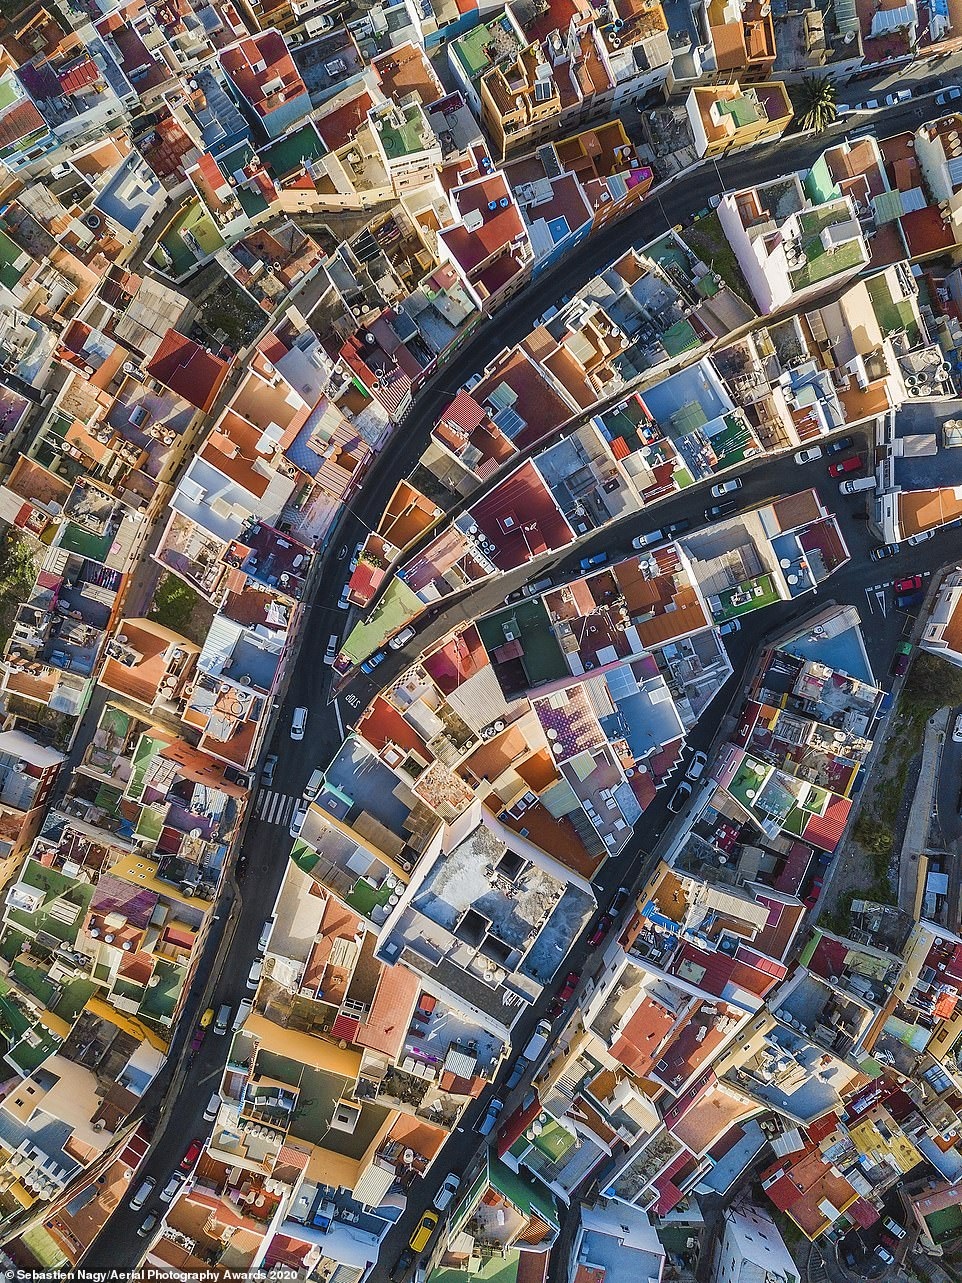 The colourful roofs of Las Palmas de Gran Canaria can be seen in a shot by Sebastien Nagy that ultimately compelled judges to award it first prize in the Cityscapes category.